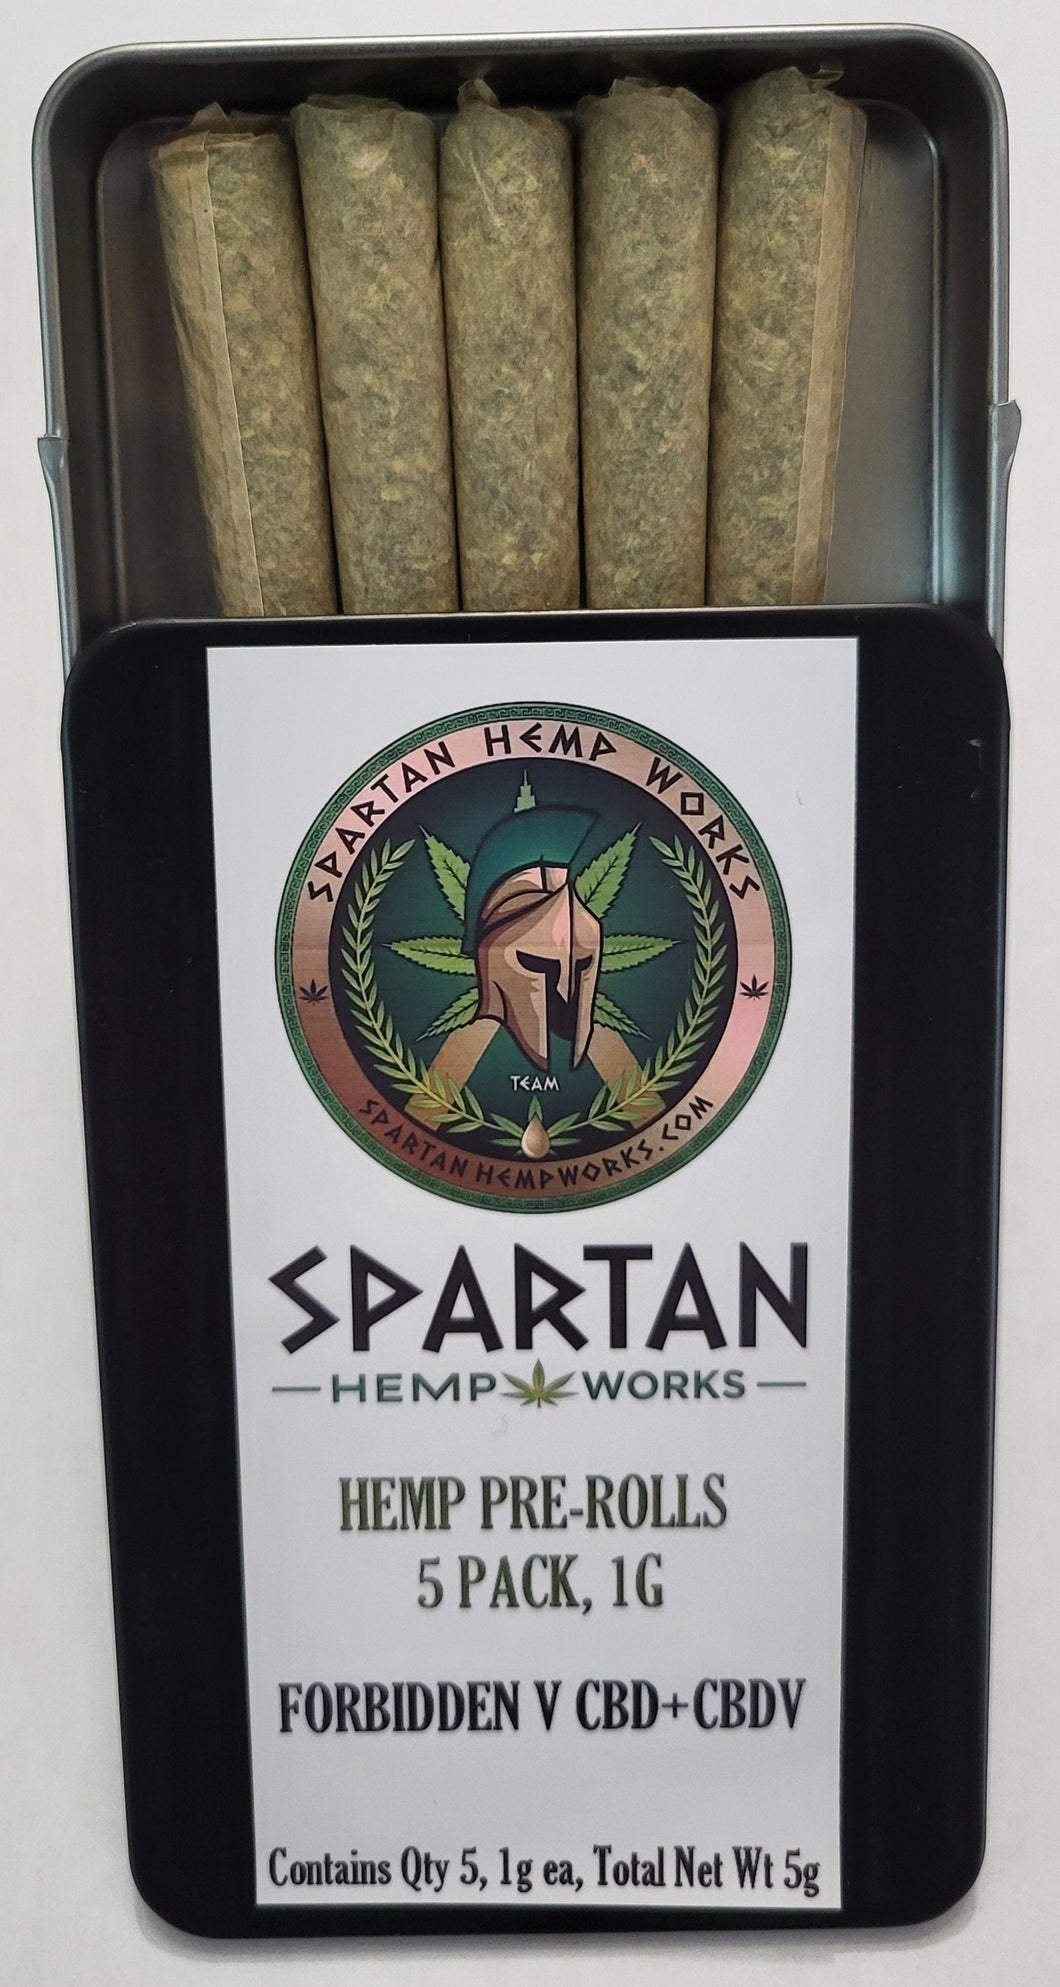 Forbidden V CBD & CBDV Hemp Flower Pre-Rolls, 5 Pack.  Filled with our slow dried, slow cured, well-trimmed Hemp Flower, this organically grown strain is relaxing and non-psychoactive federally compliant hemp flower.  A great tasting strain that is comforting and relaxing.